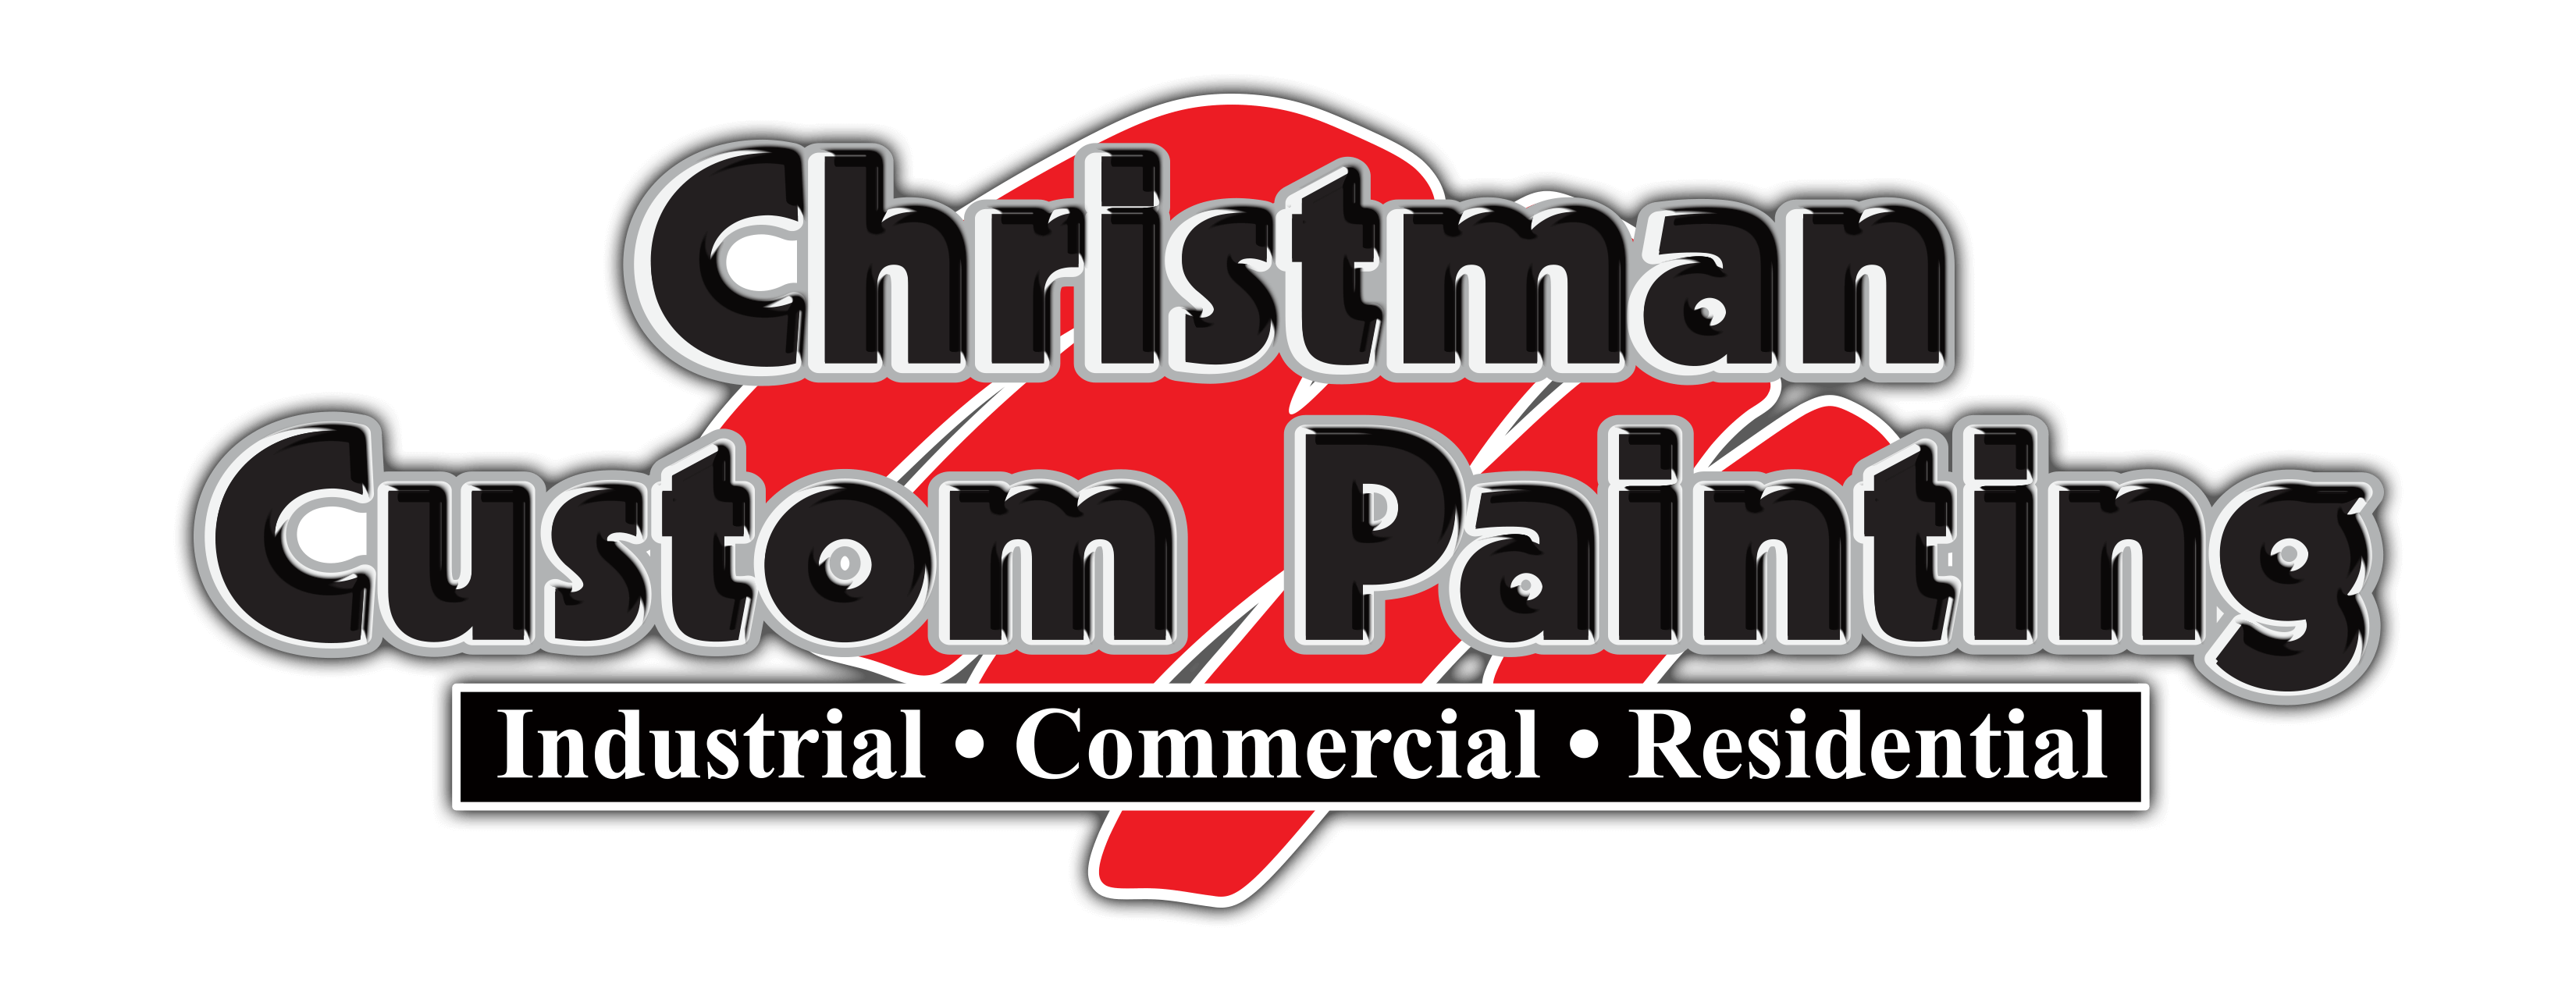 Custom Painting Logo - Christman Custom Painting. Your Home, Only Better